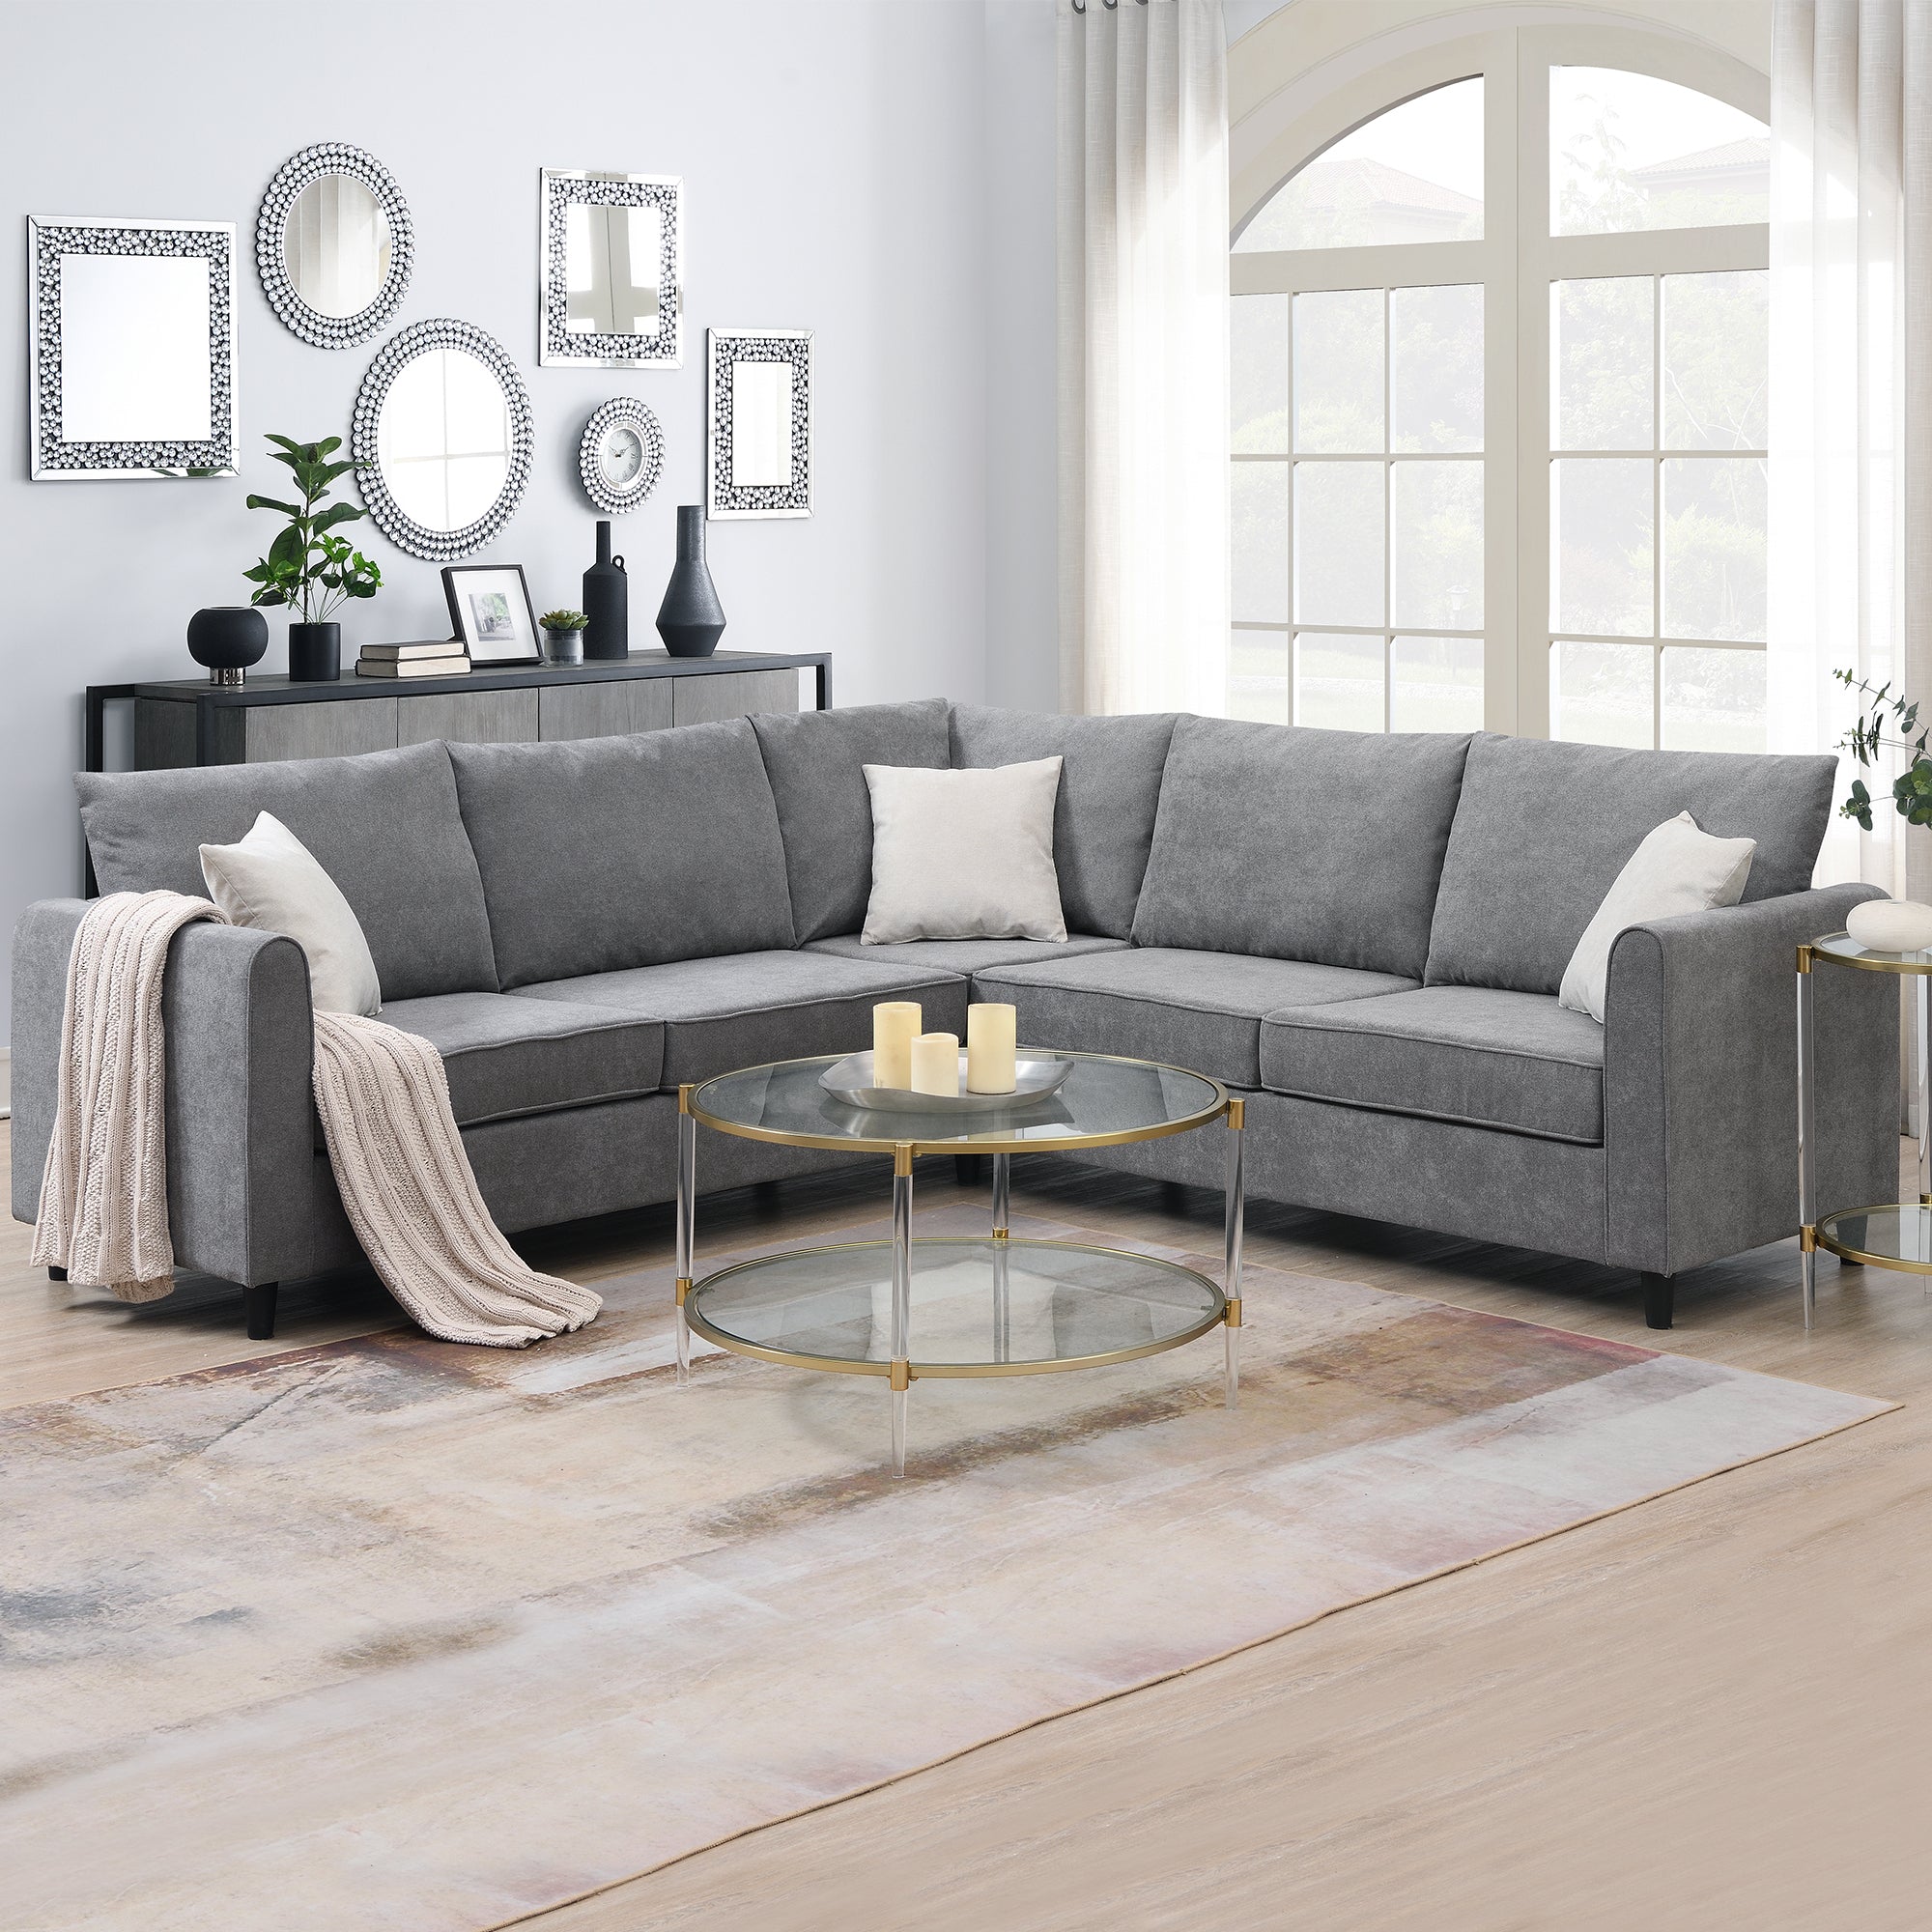 Modern Upholstered Living Room Sectional Sofa / L Shape Furniture Couch